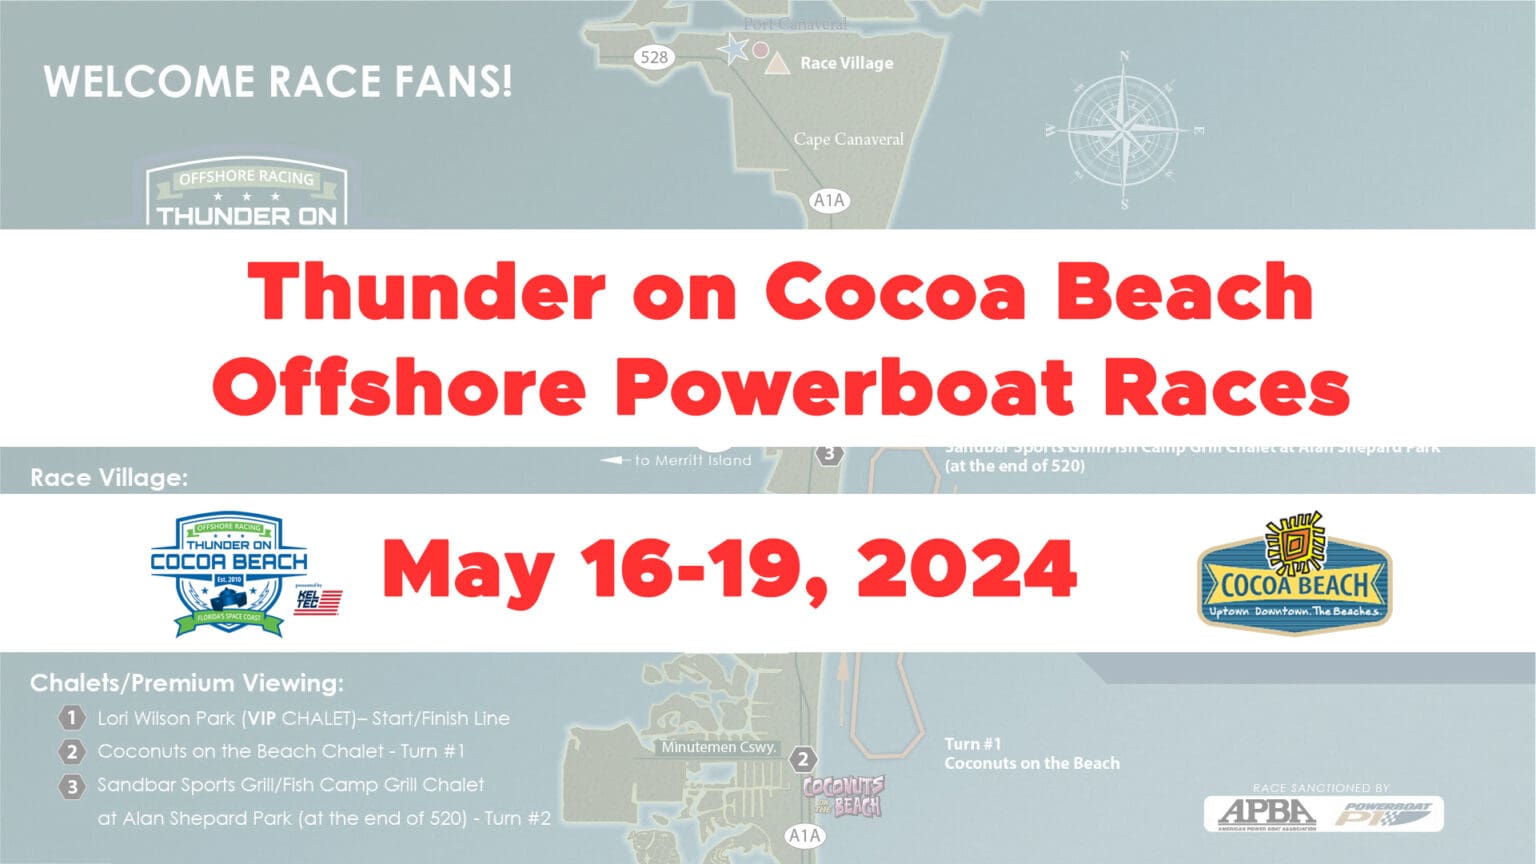 Thunder on Cocoa Beach Offshore Powerboat Races 2024